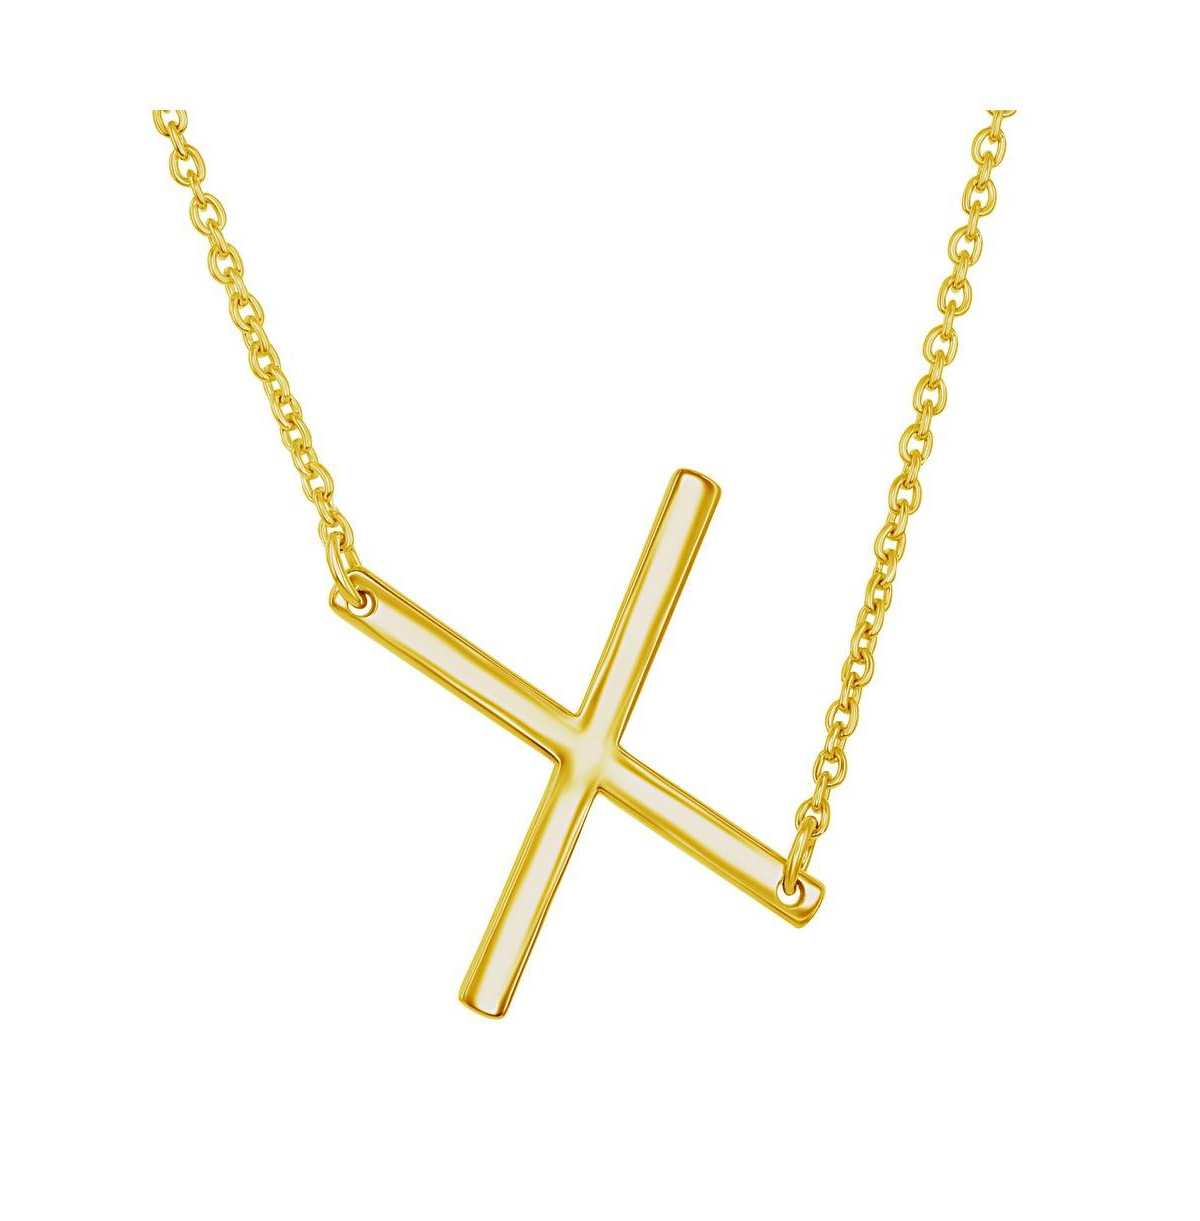 Gold Tone Sideways Initial Necklace - Gold x